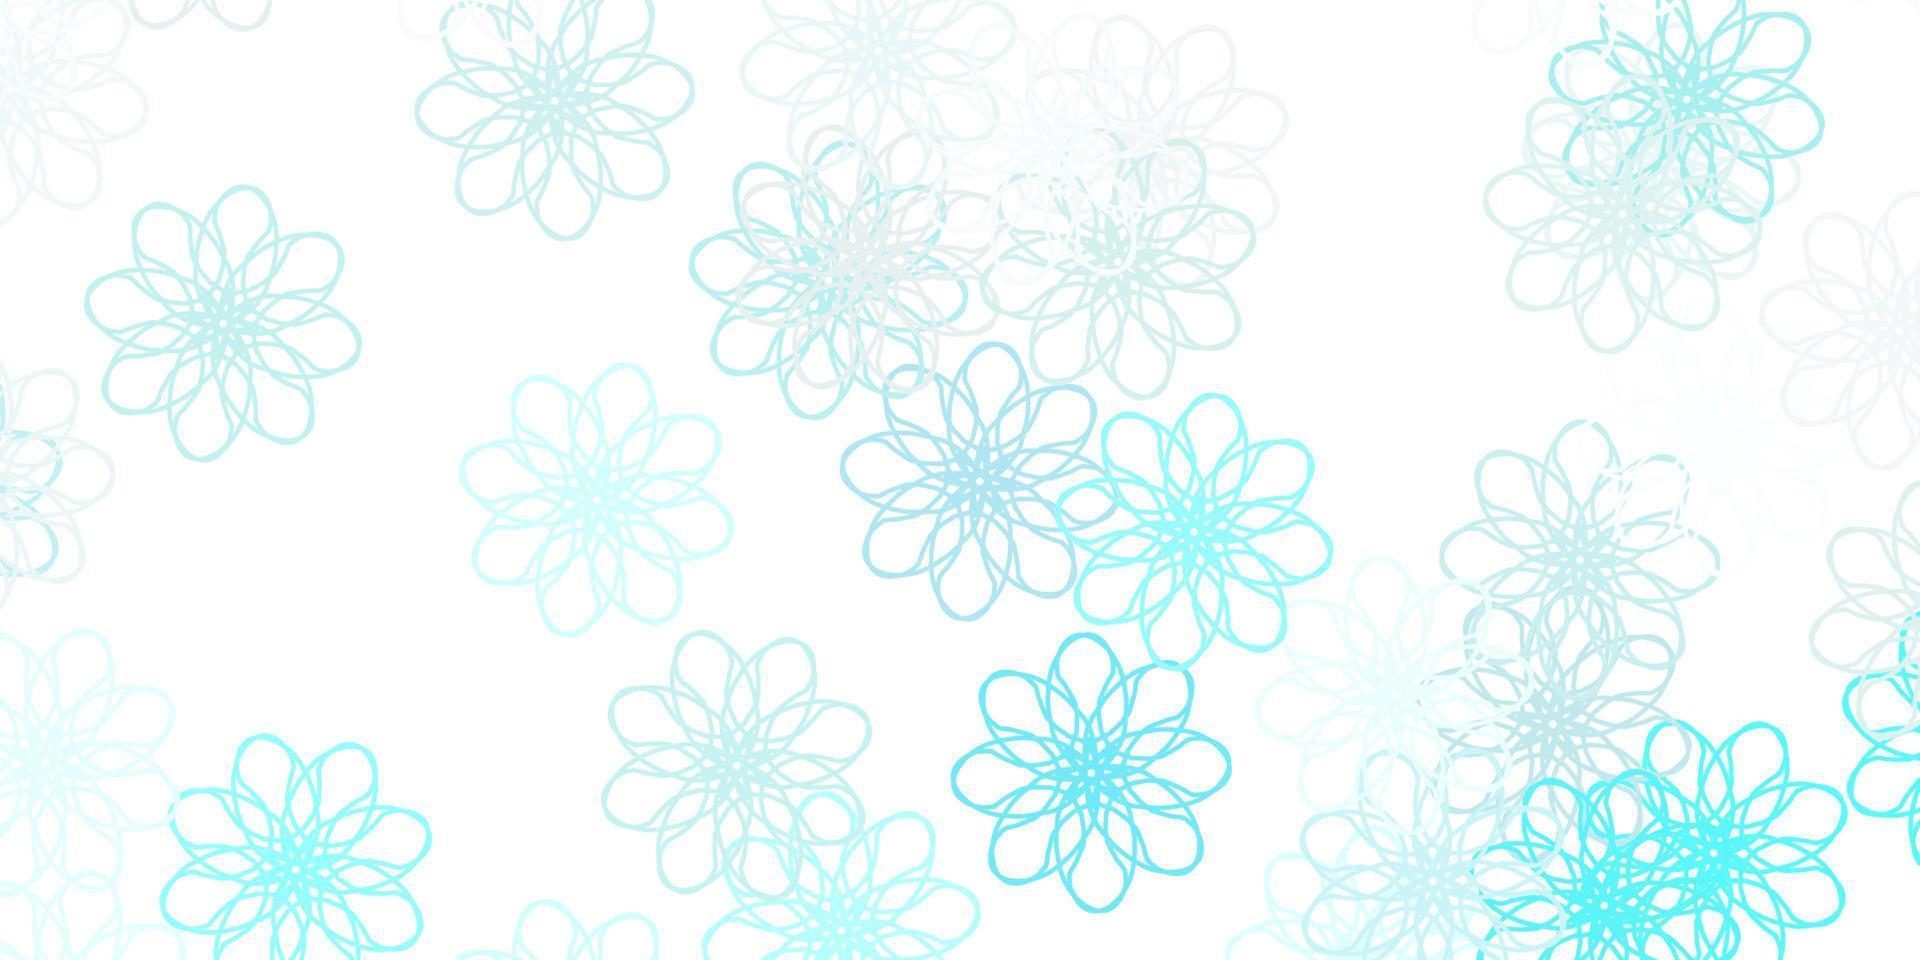 Light BLUE vector doodle pattern with flowers.